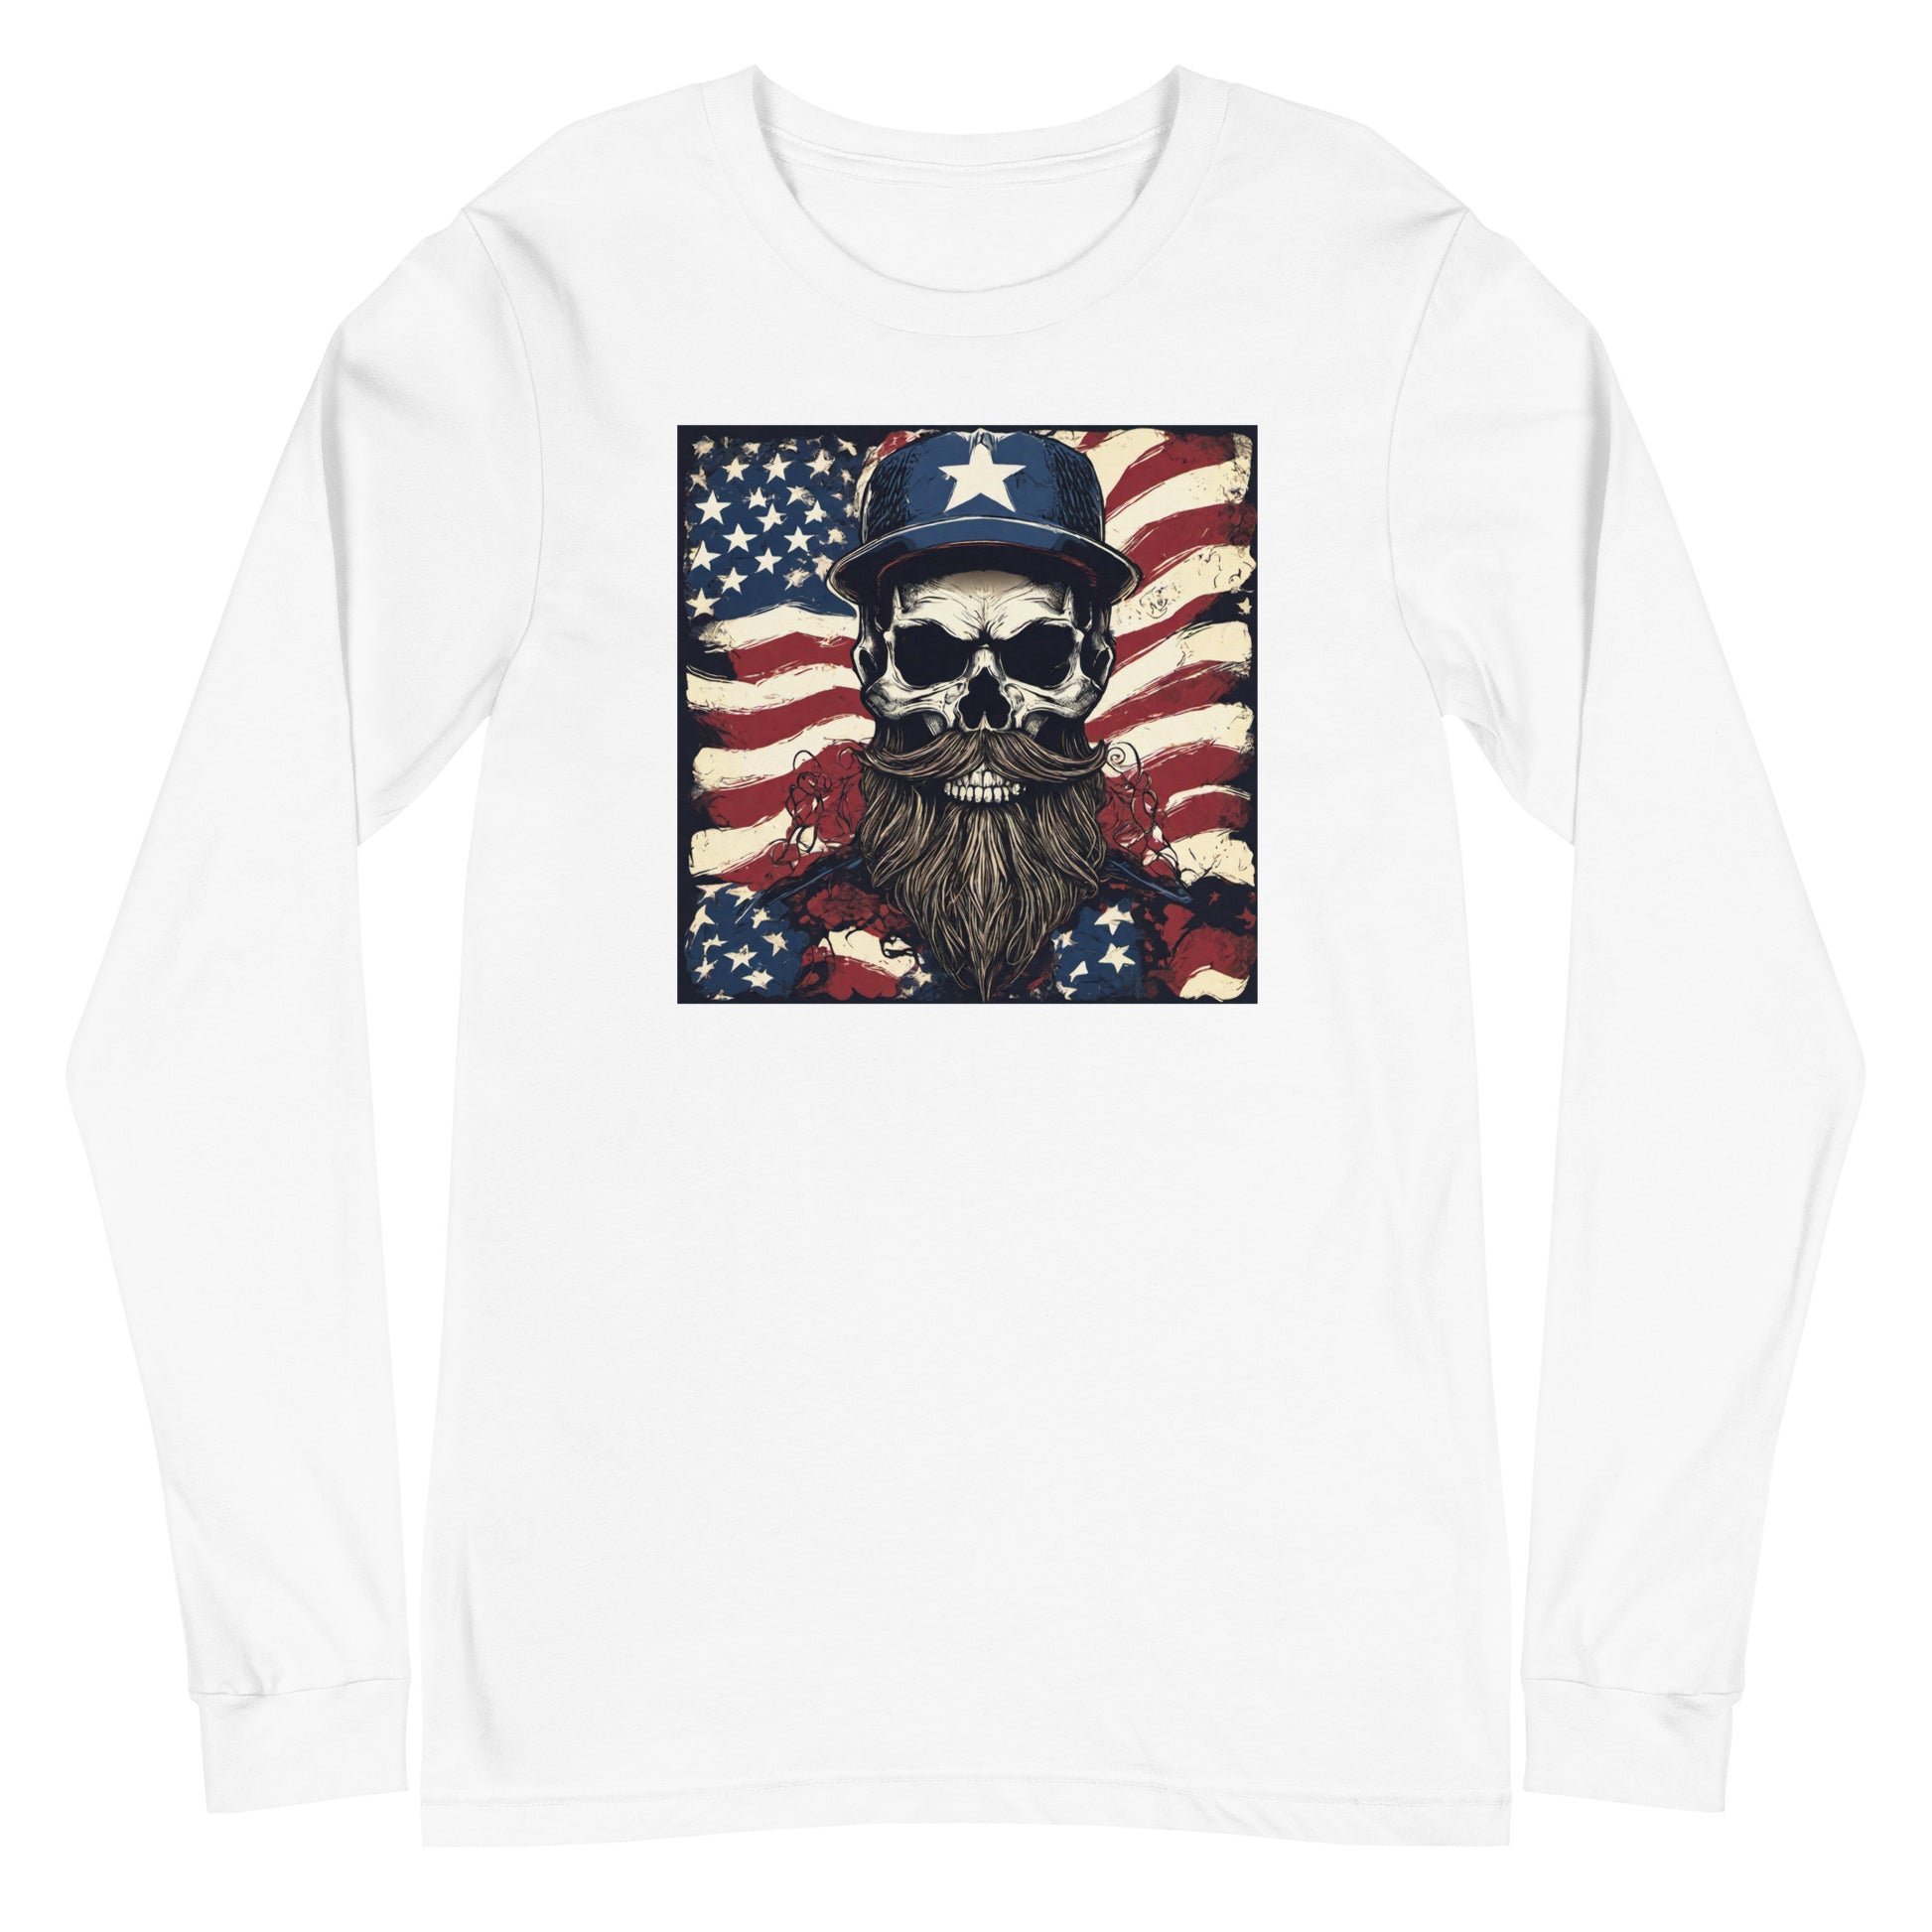 Handsome American Reaper Long Sleeve Graphic Tee White